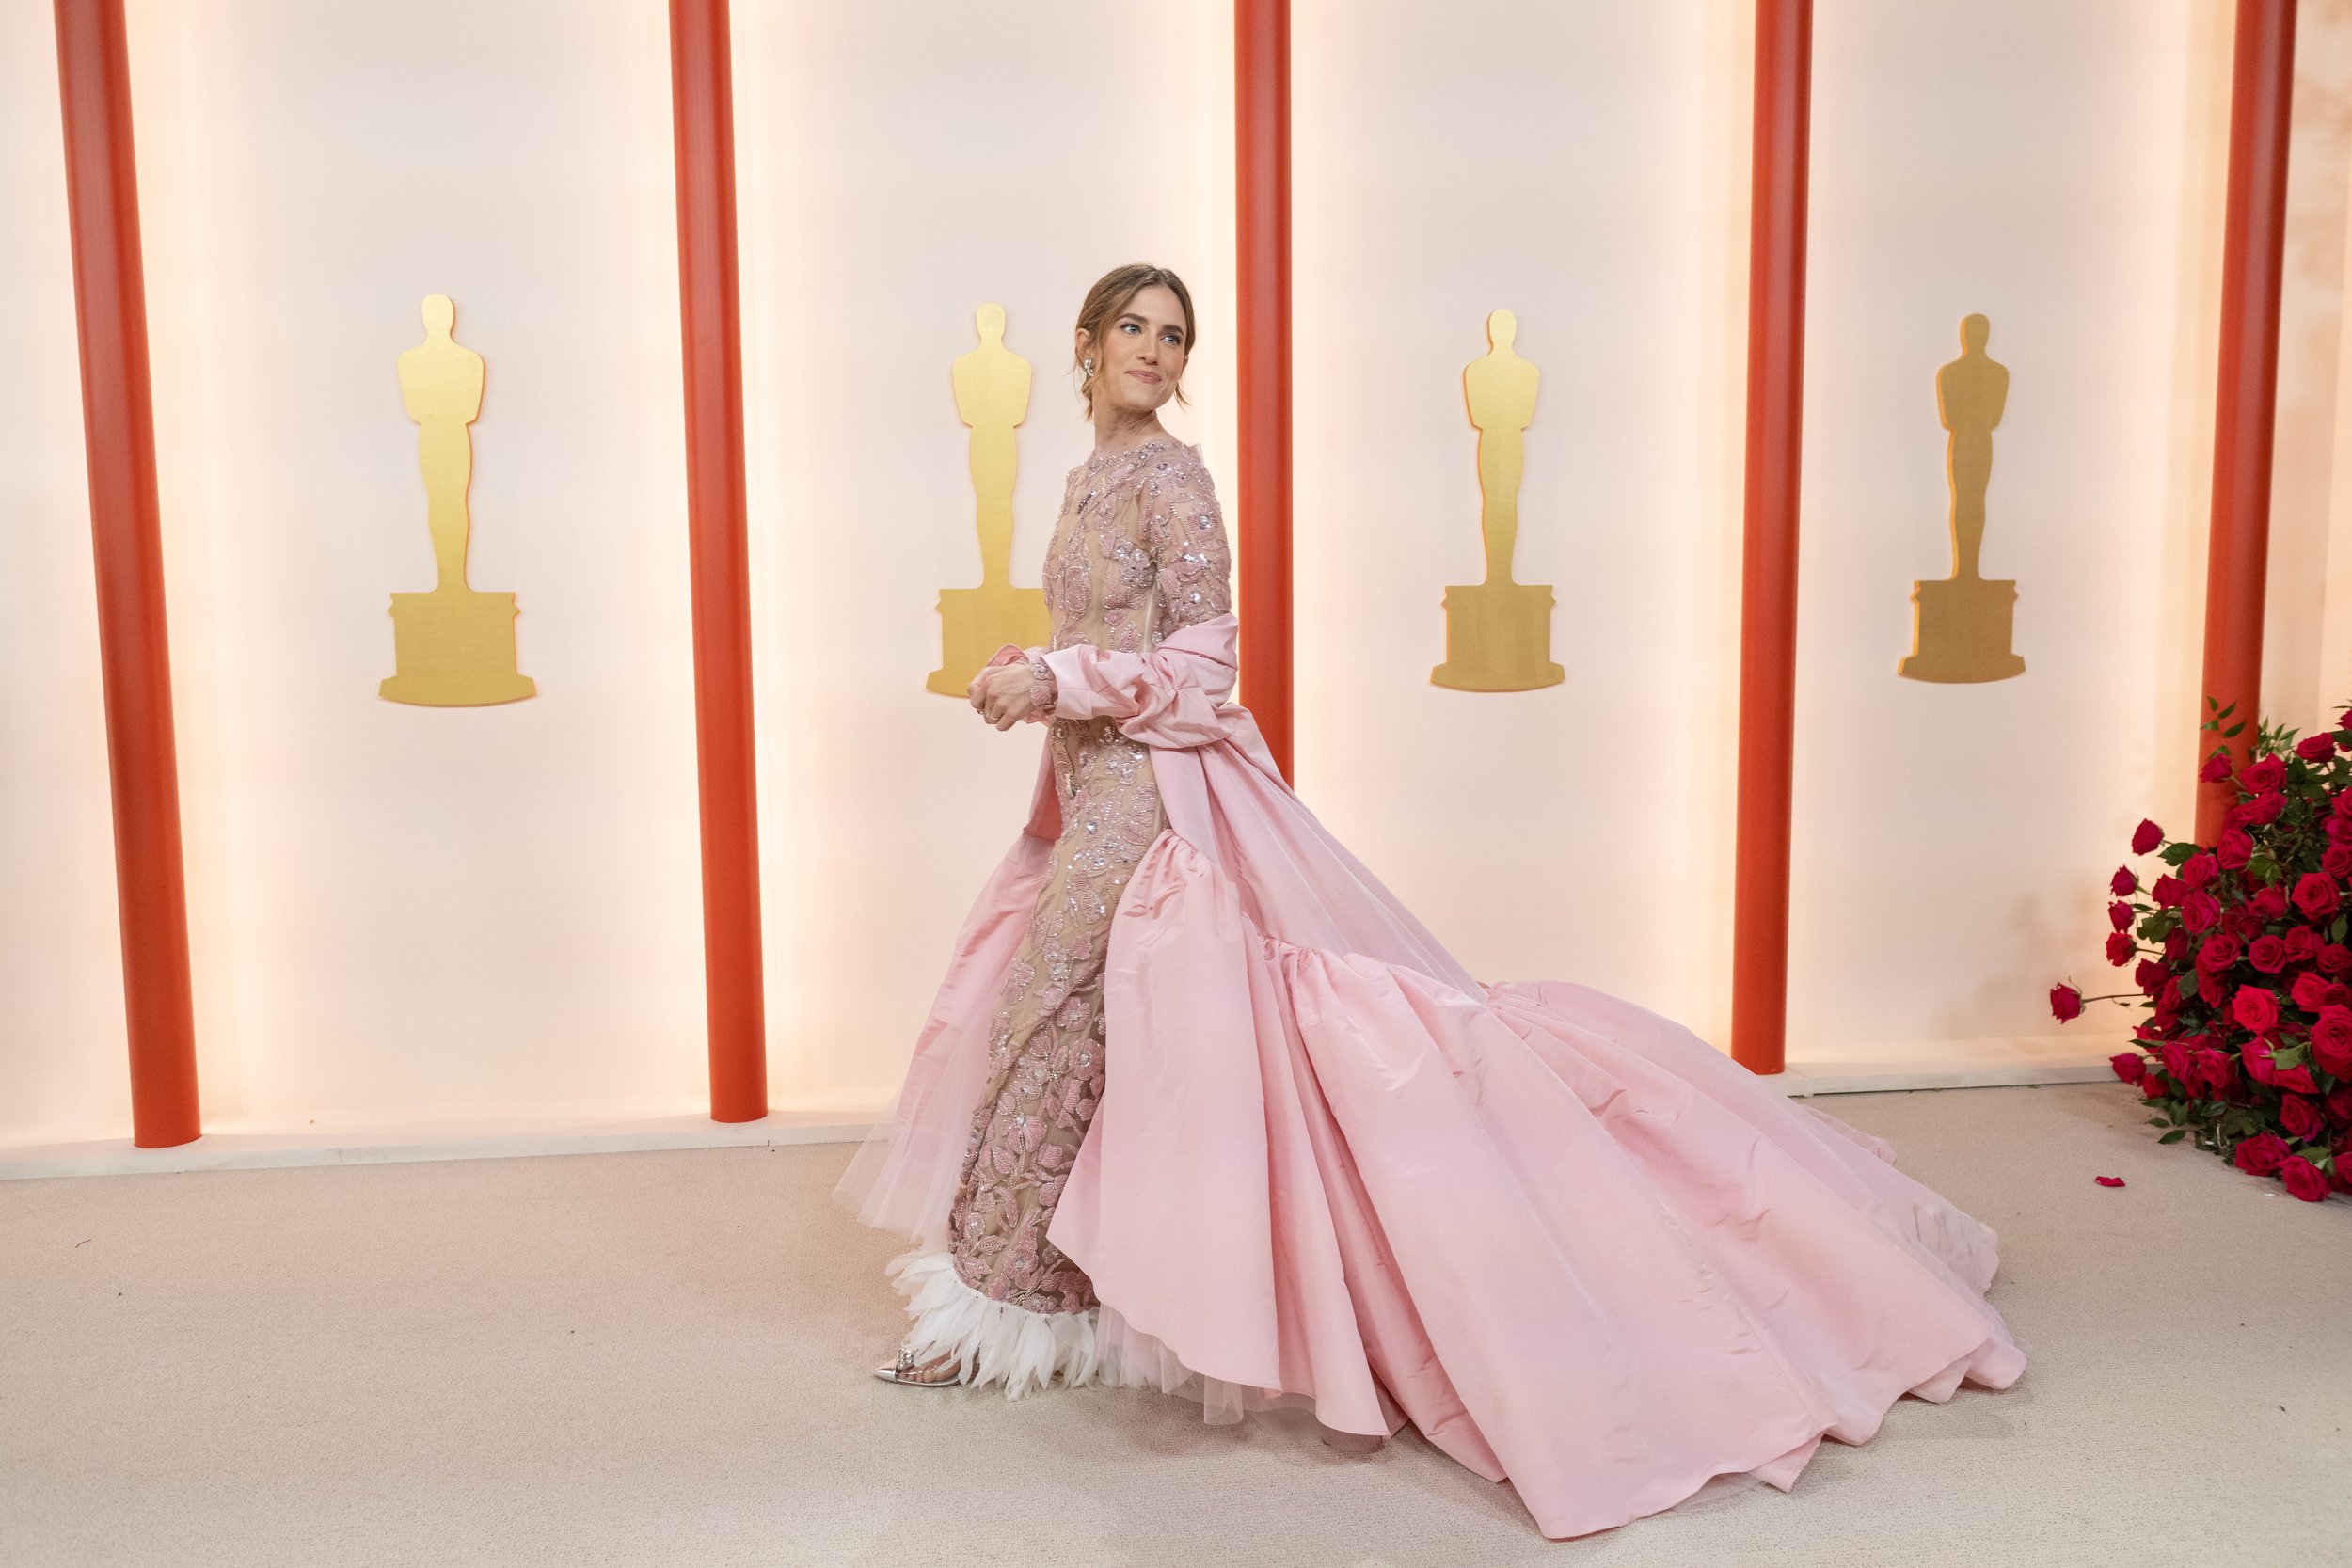 Allison Williams arrives on the red carpet of The 95th Oscars